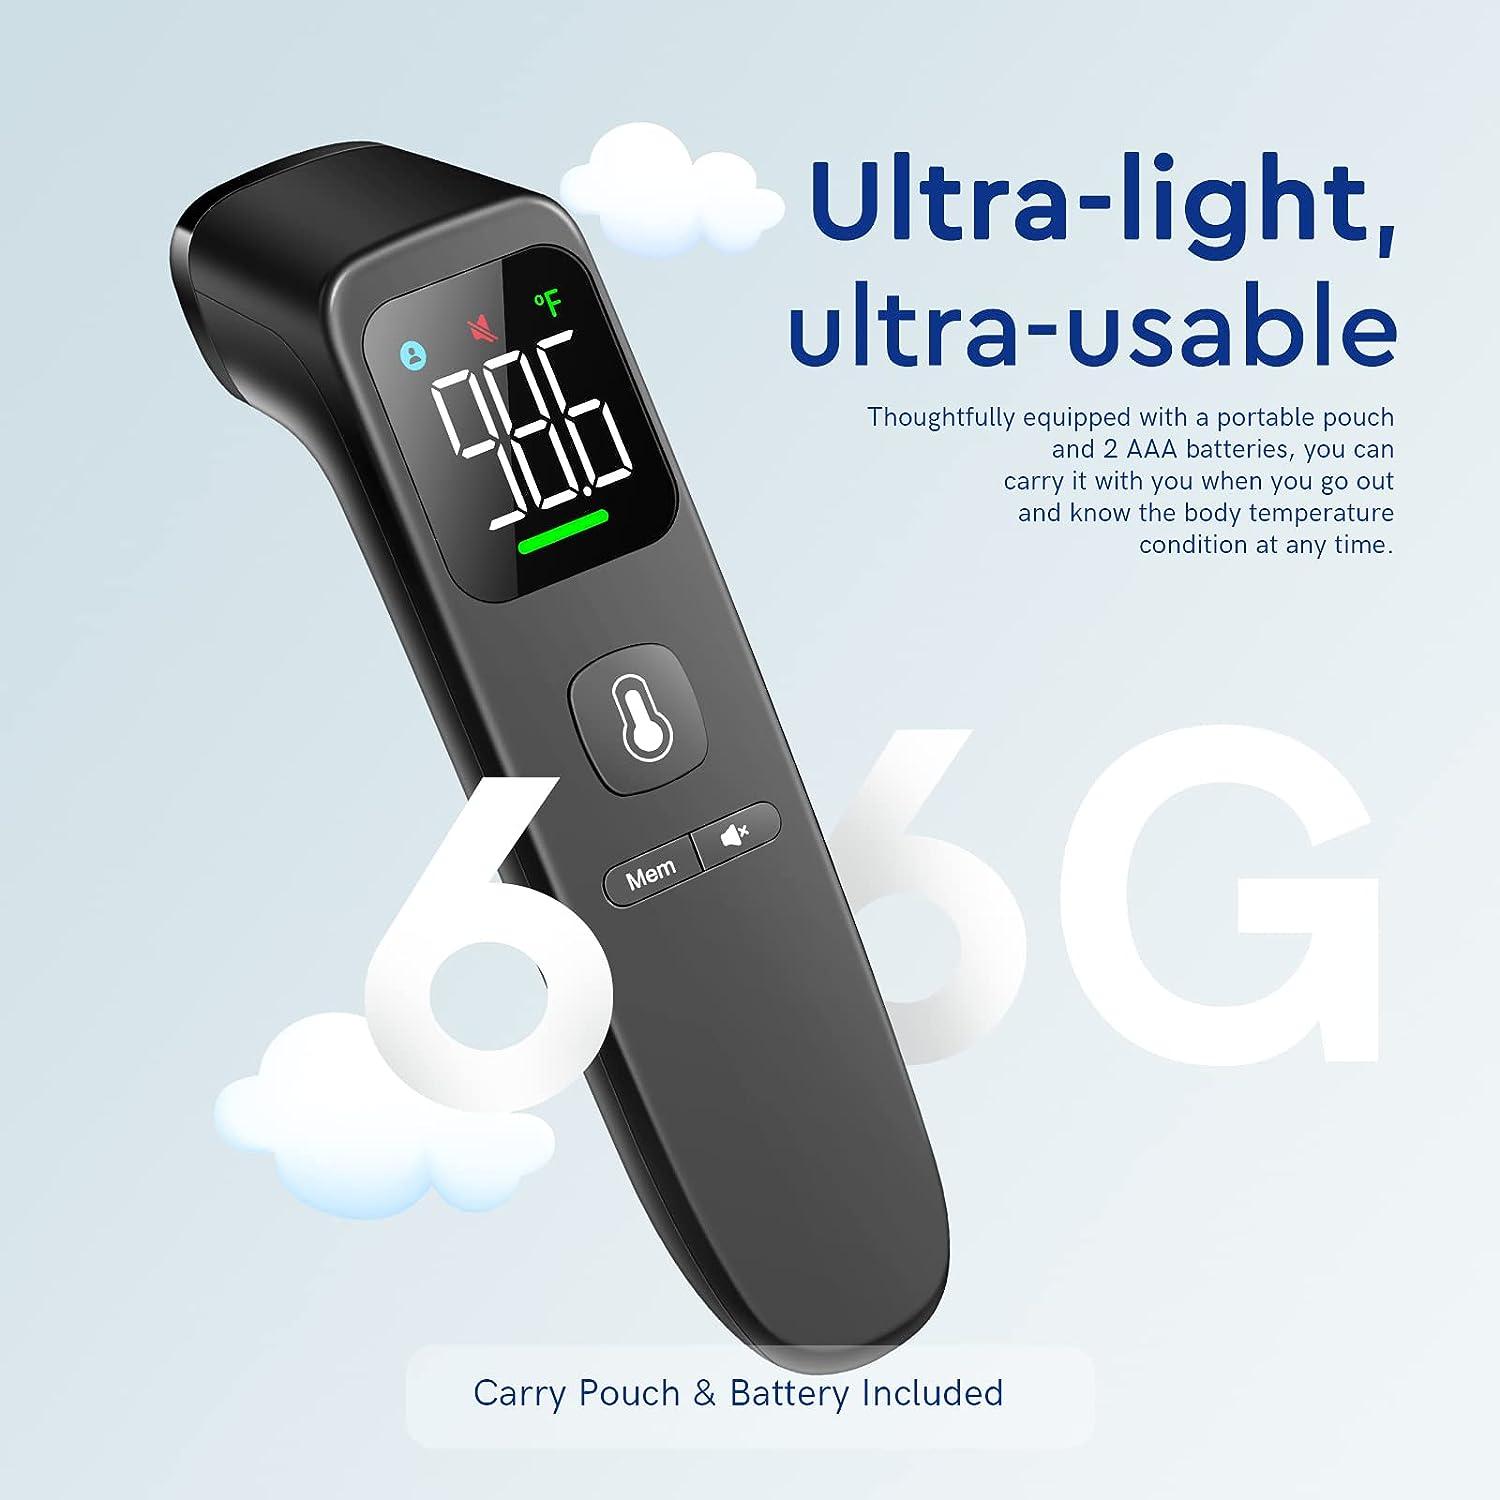 No Touch Forehead Thermometer (FDA-Cleared)